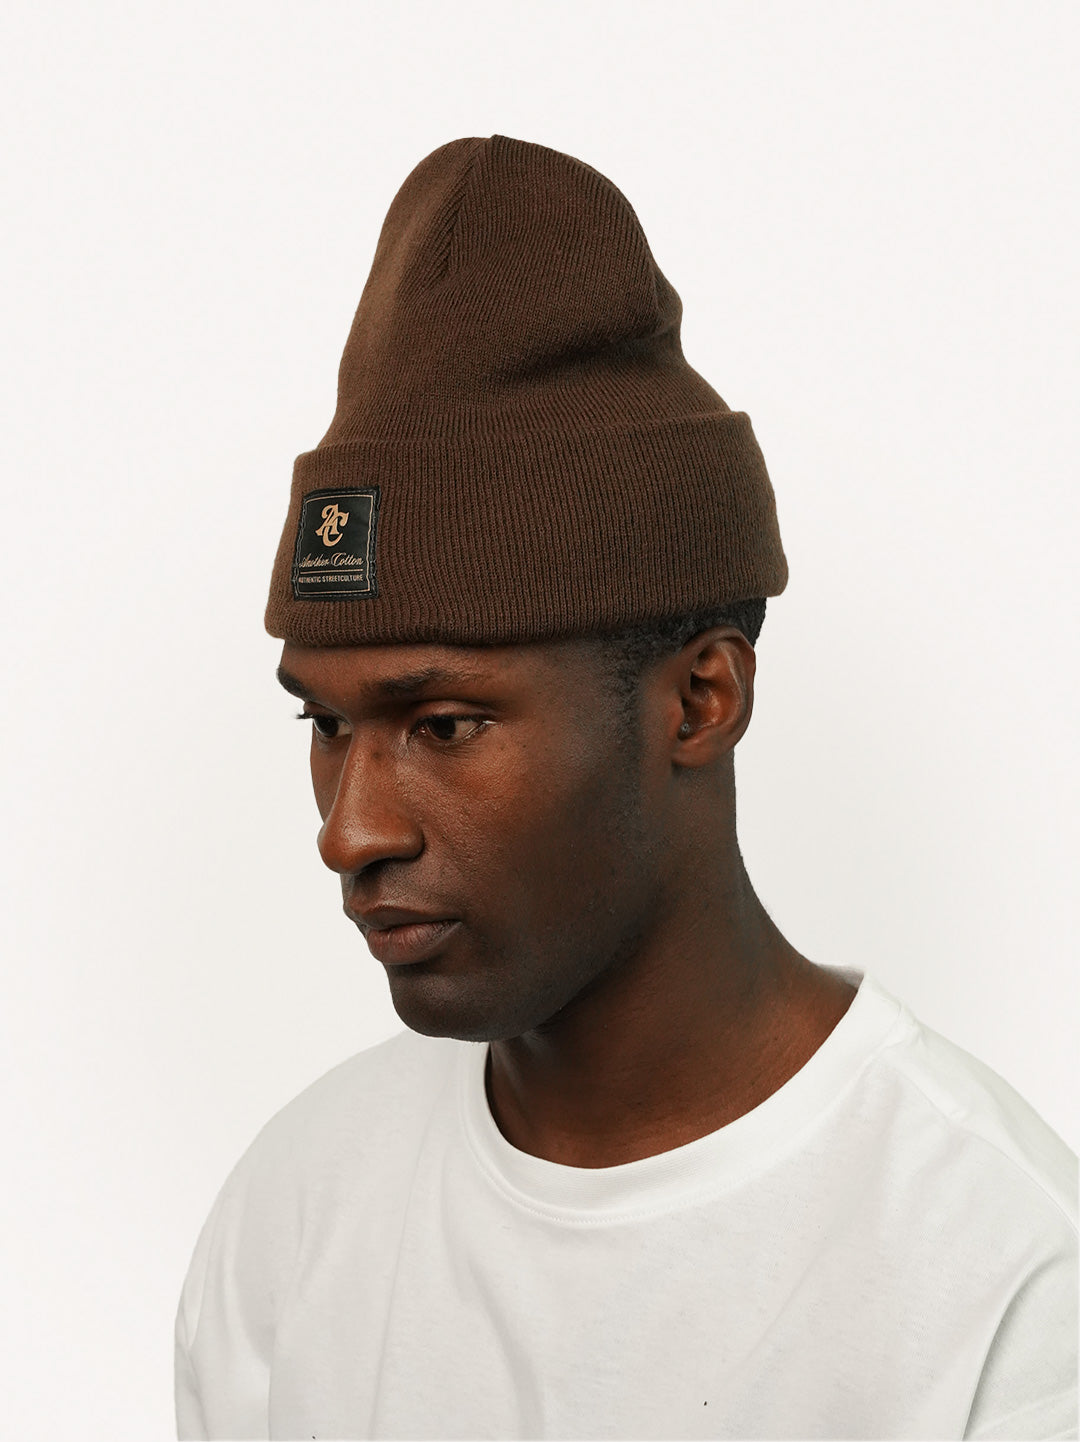 Another Cotton Classic Beanie